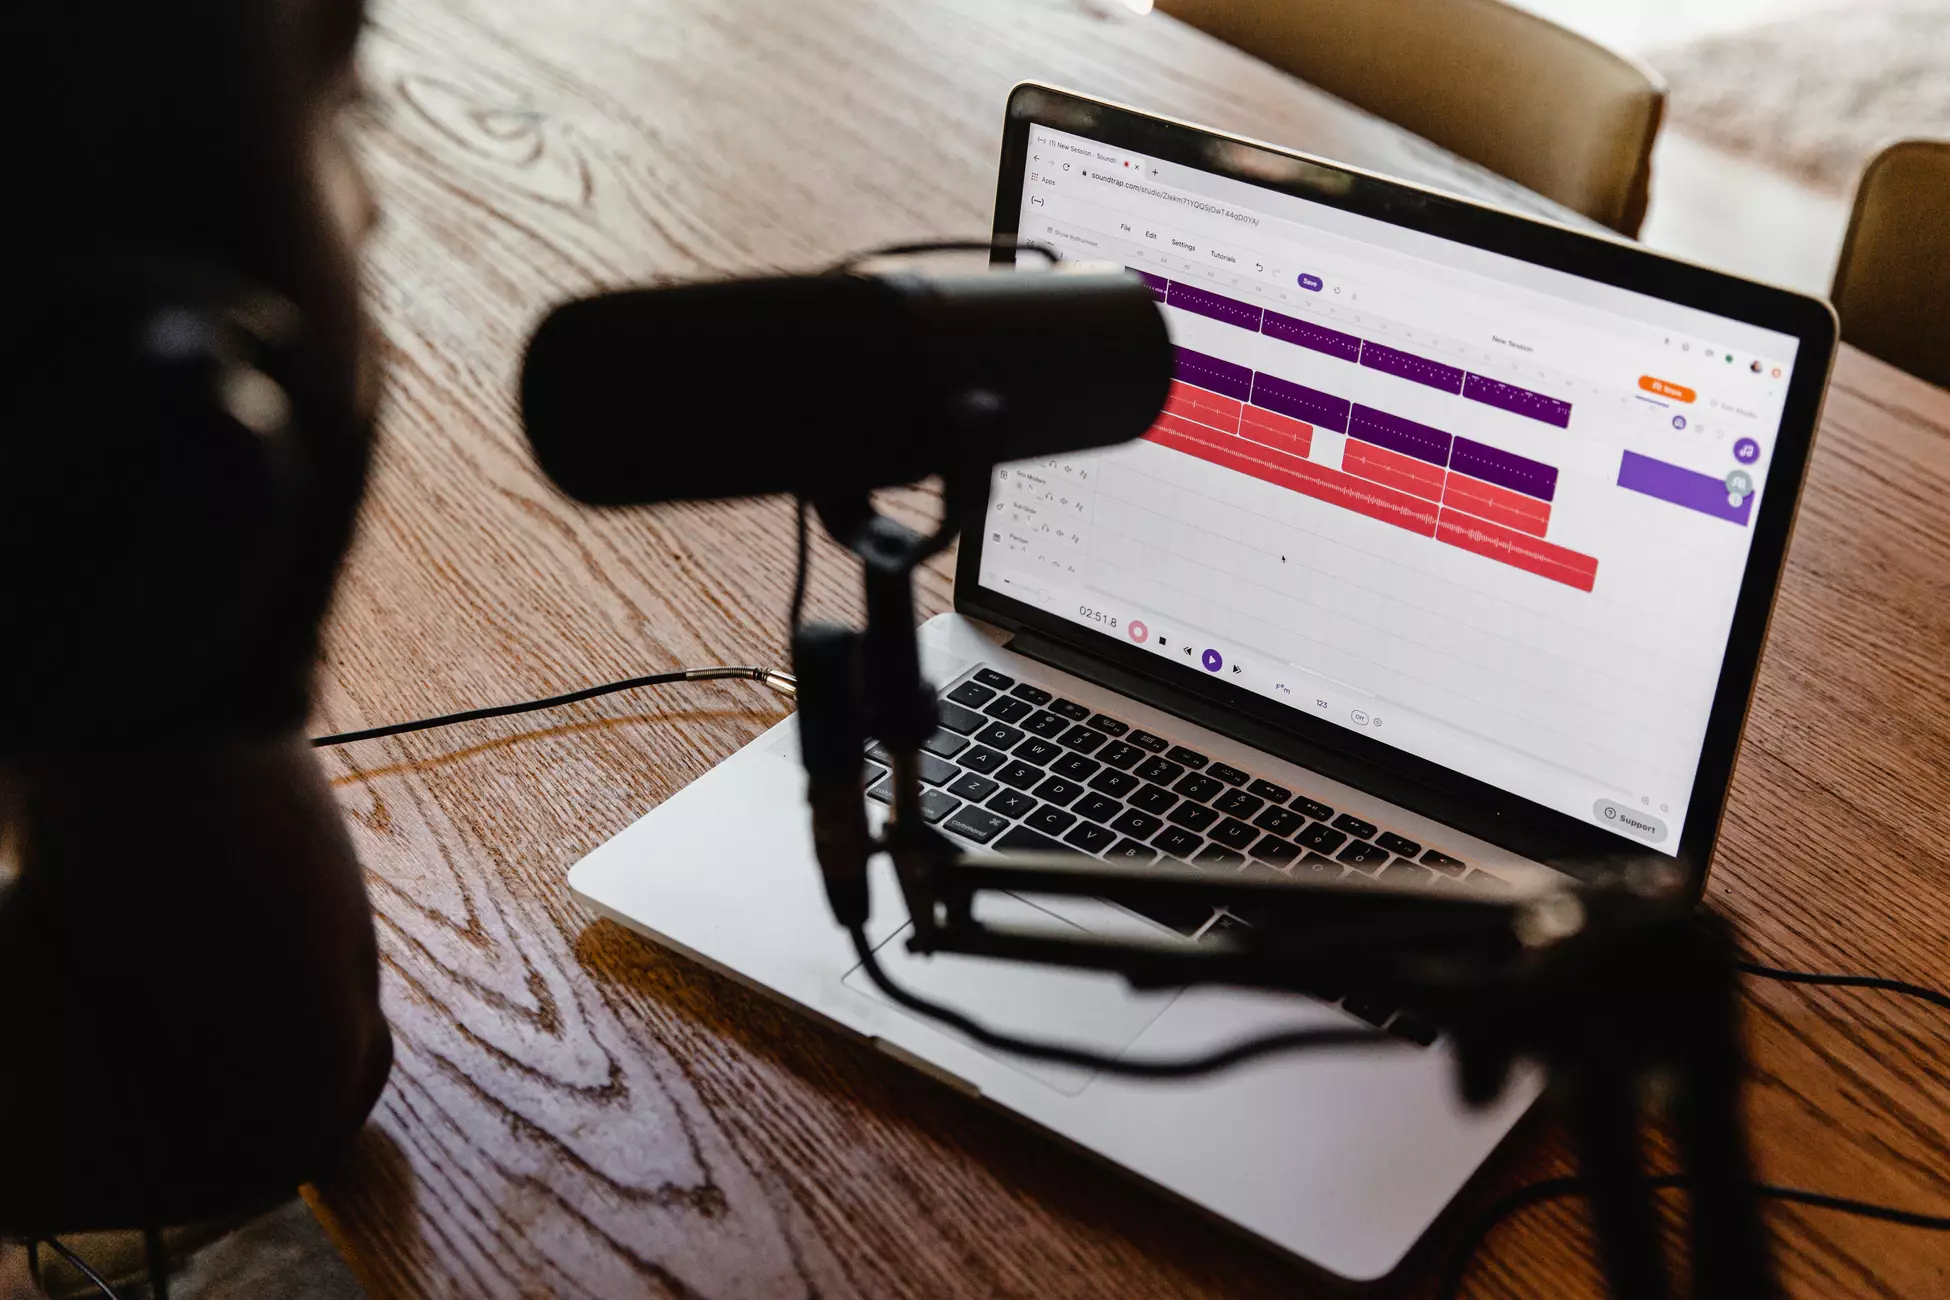 Stock photo of a man recording a podcast episode on his laptop